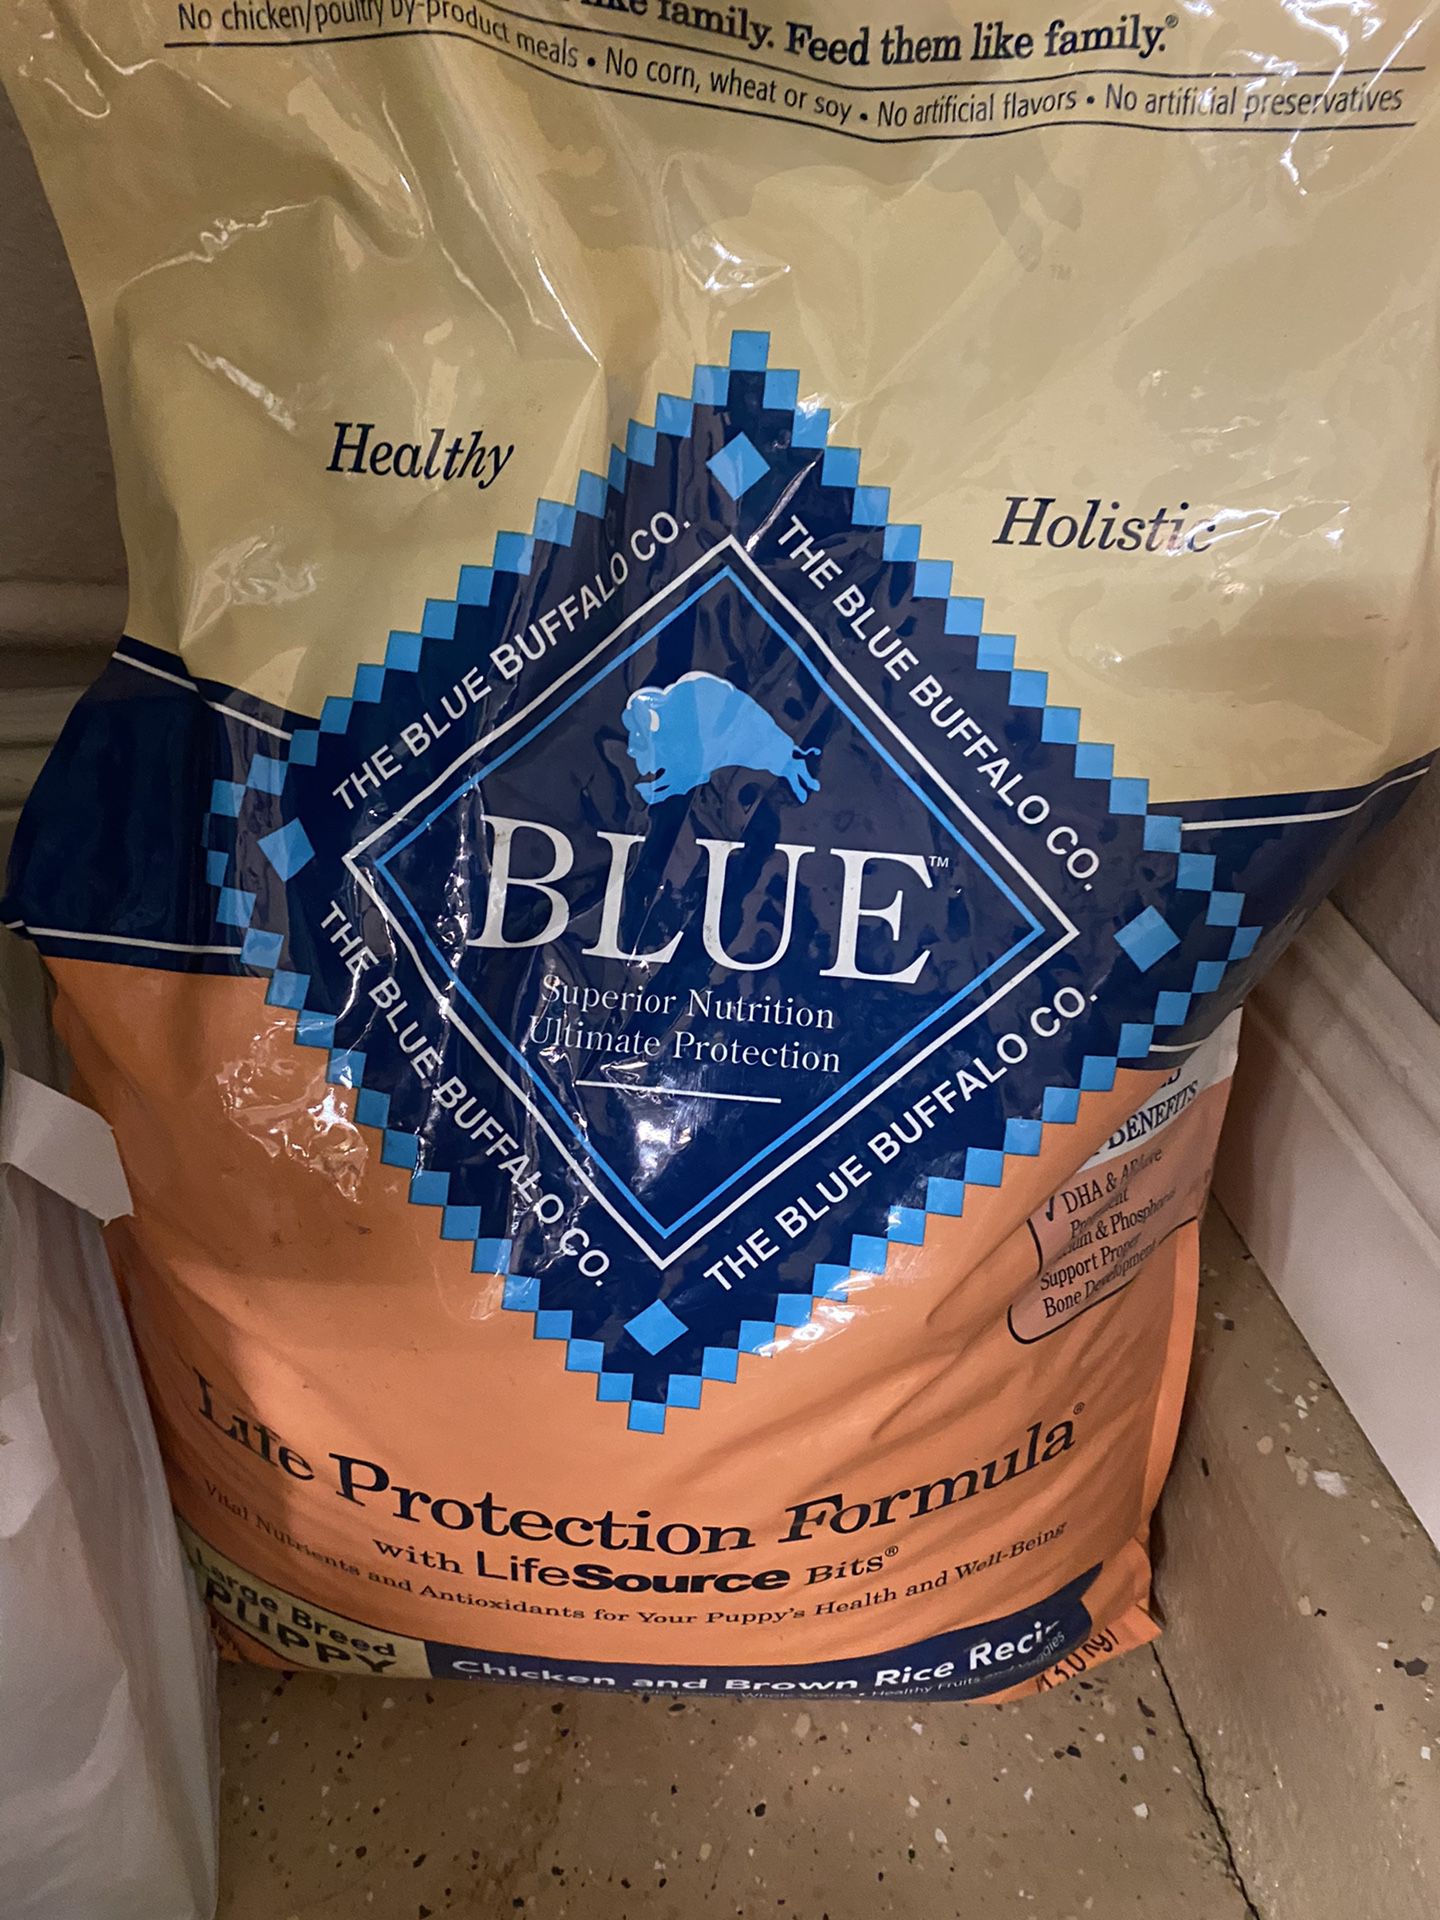 Blue Buffalo puppy food chicken and brown rice recipe 30 pound bag